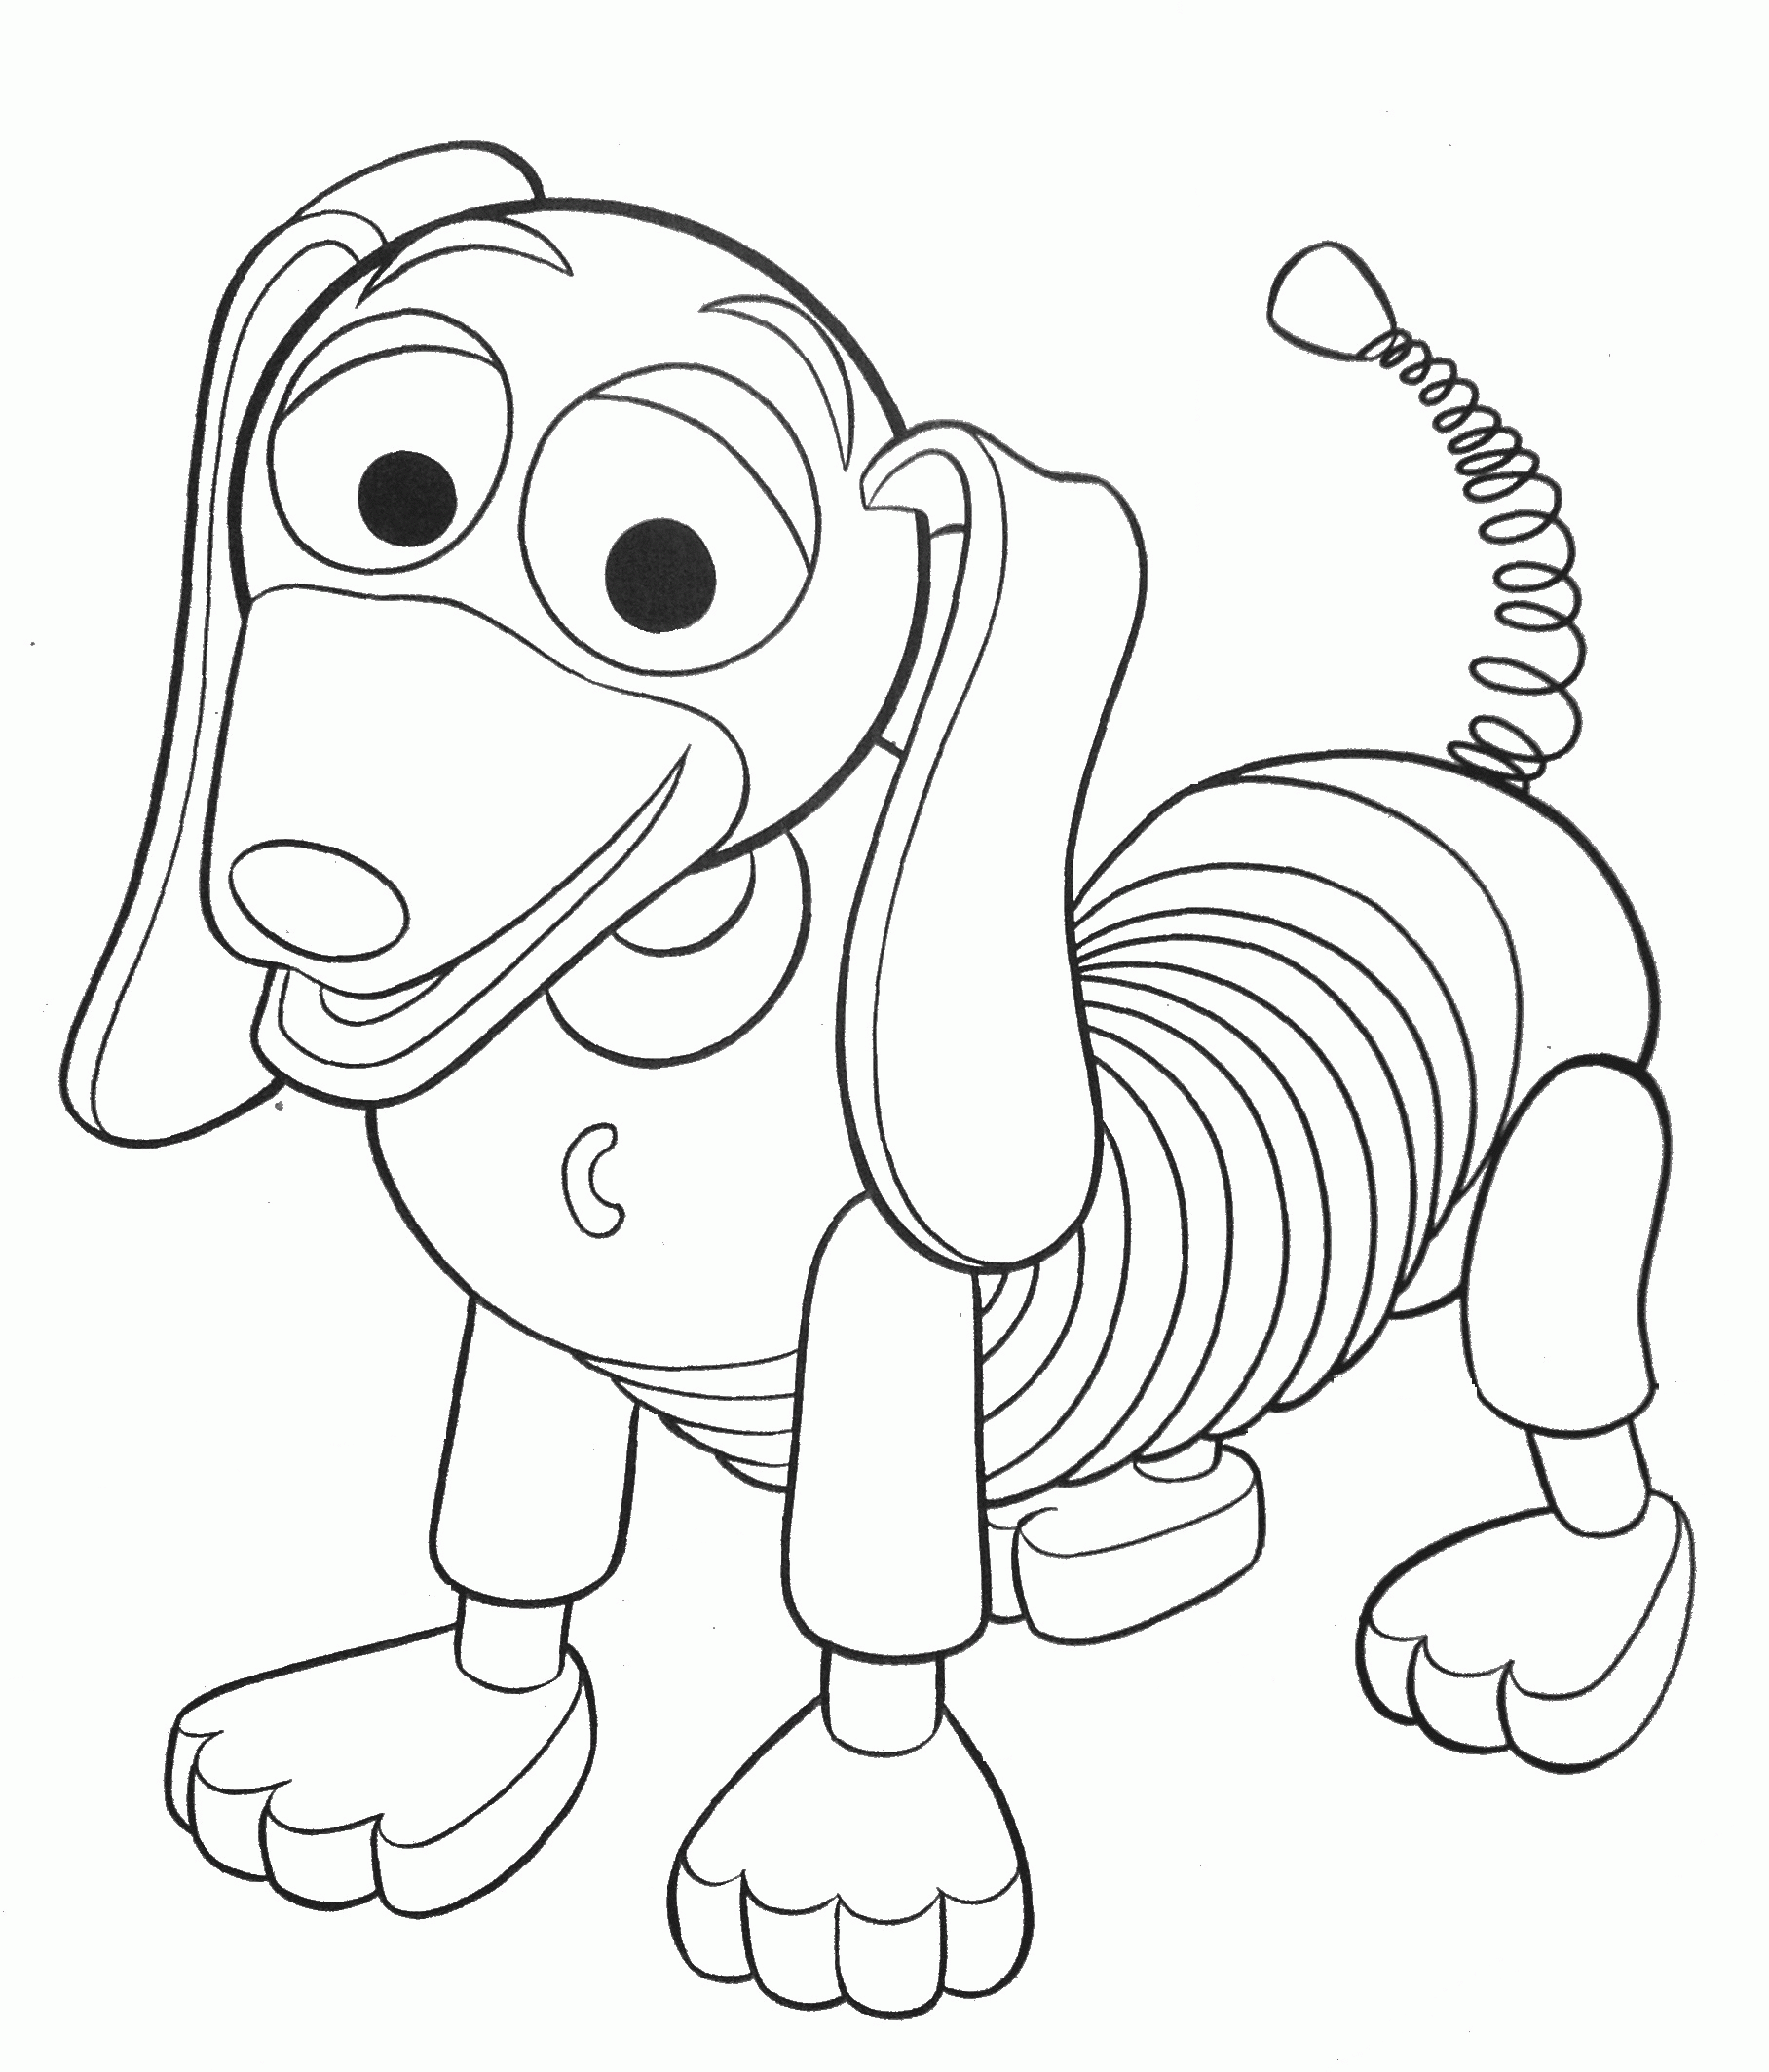 Related Toy Story Coloring Pages item-11710, Toy Story Coloring ...